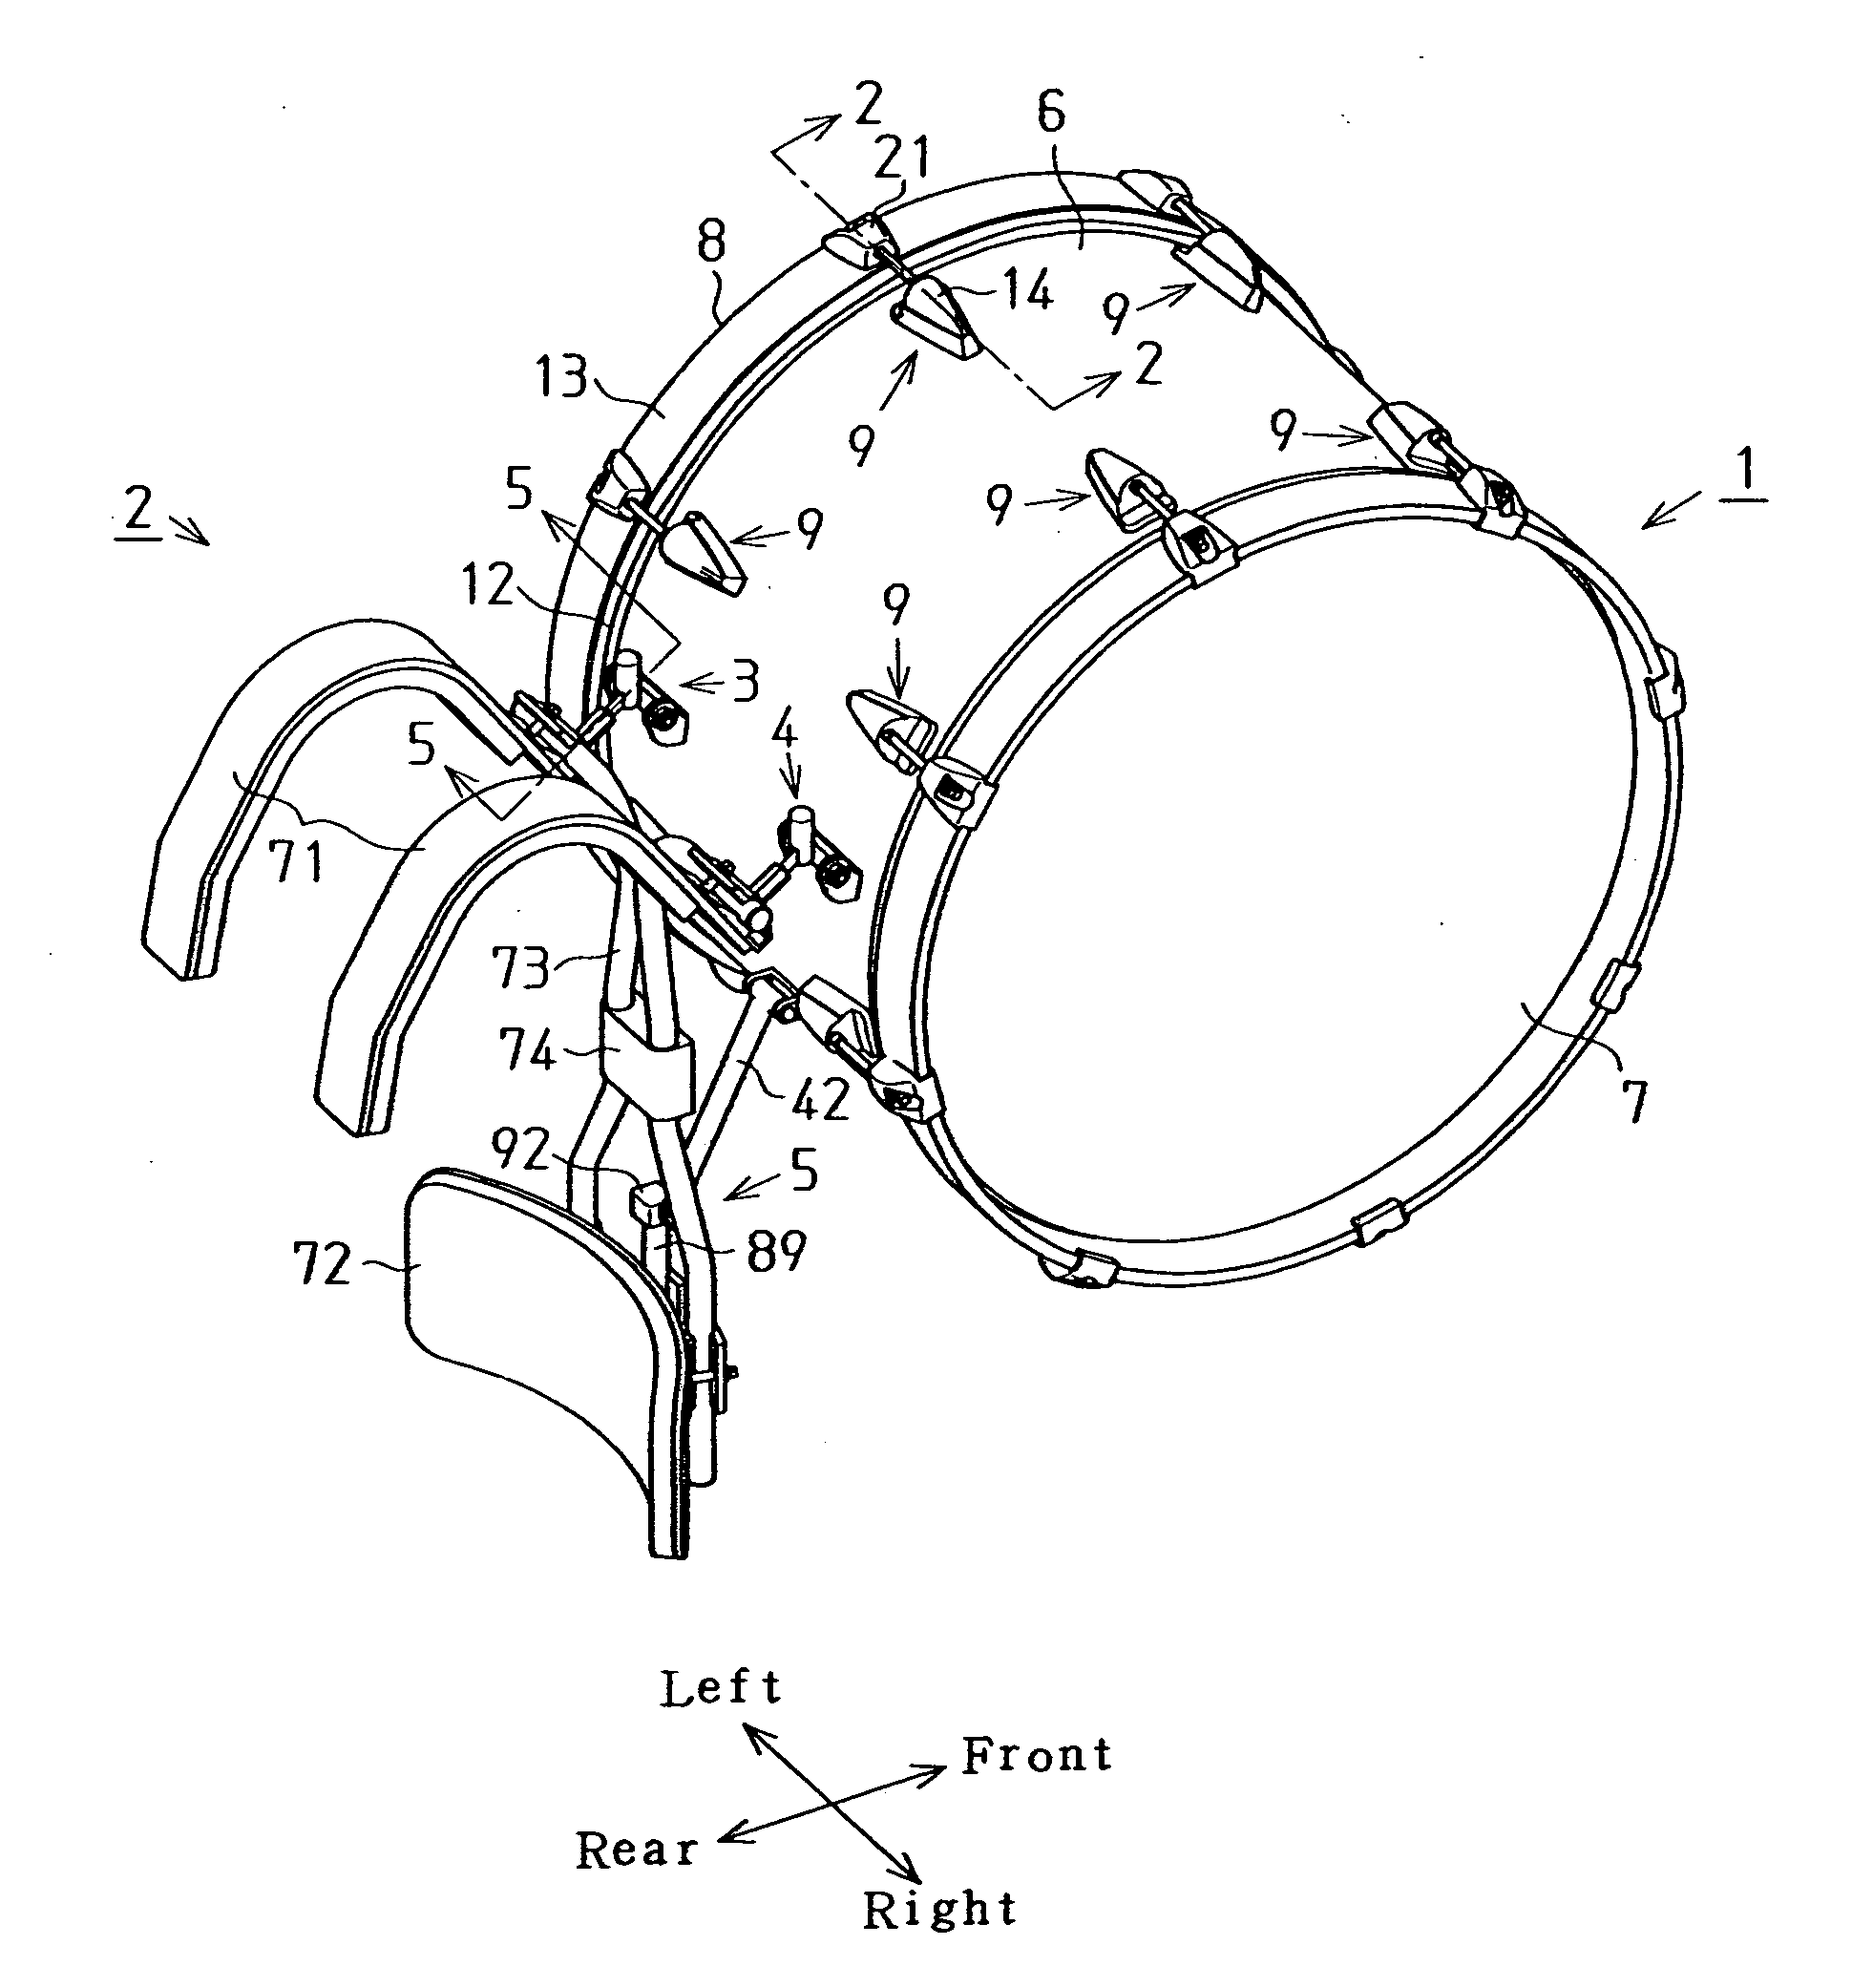 Marching bass drum supporting structure, marching bass drum, and carrier